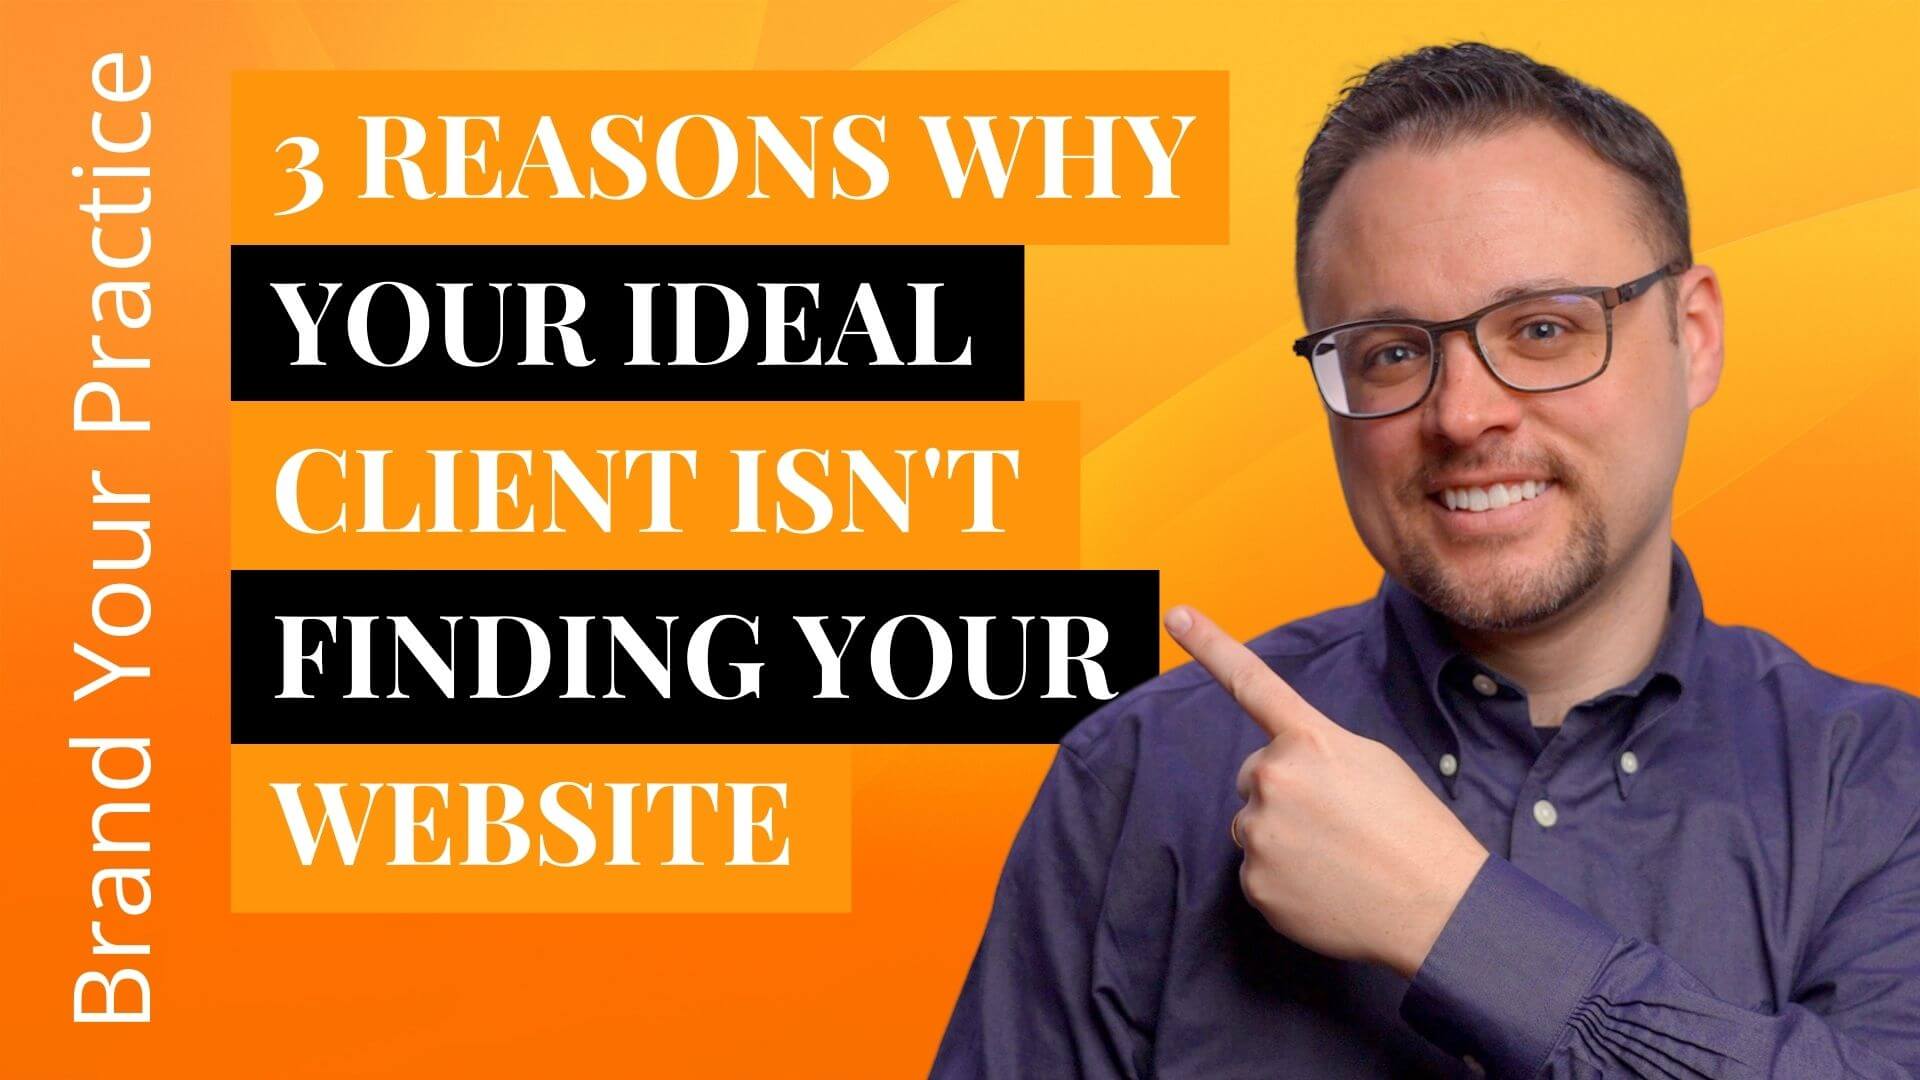 3 Reasons Why Your Ideal Client Isn't Finding Your Website